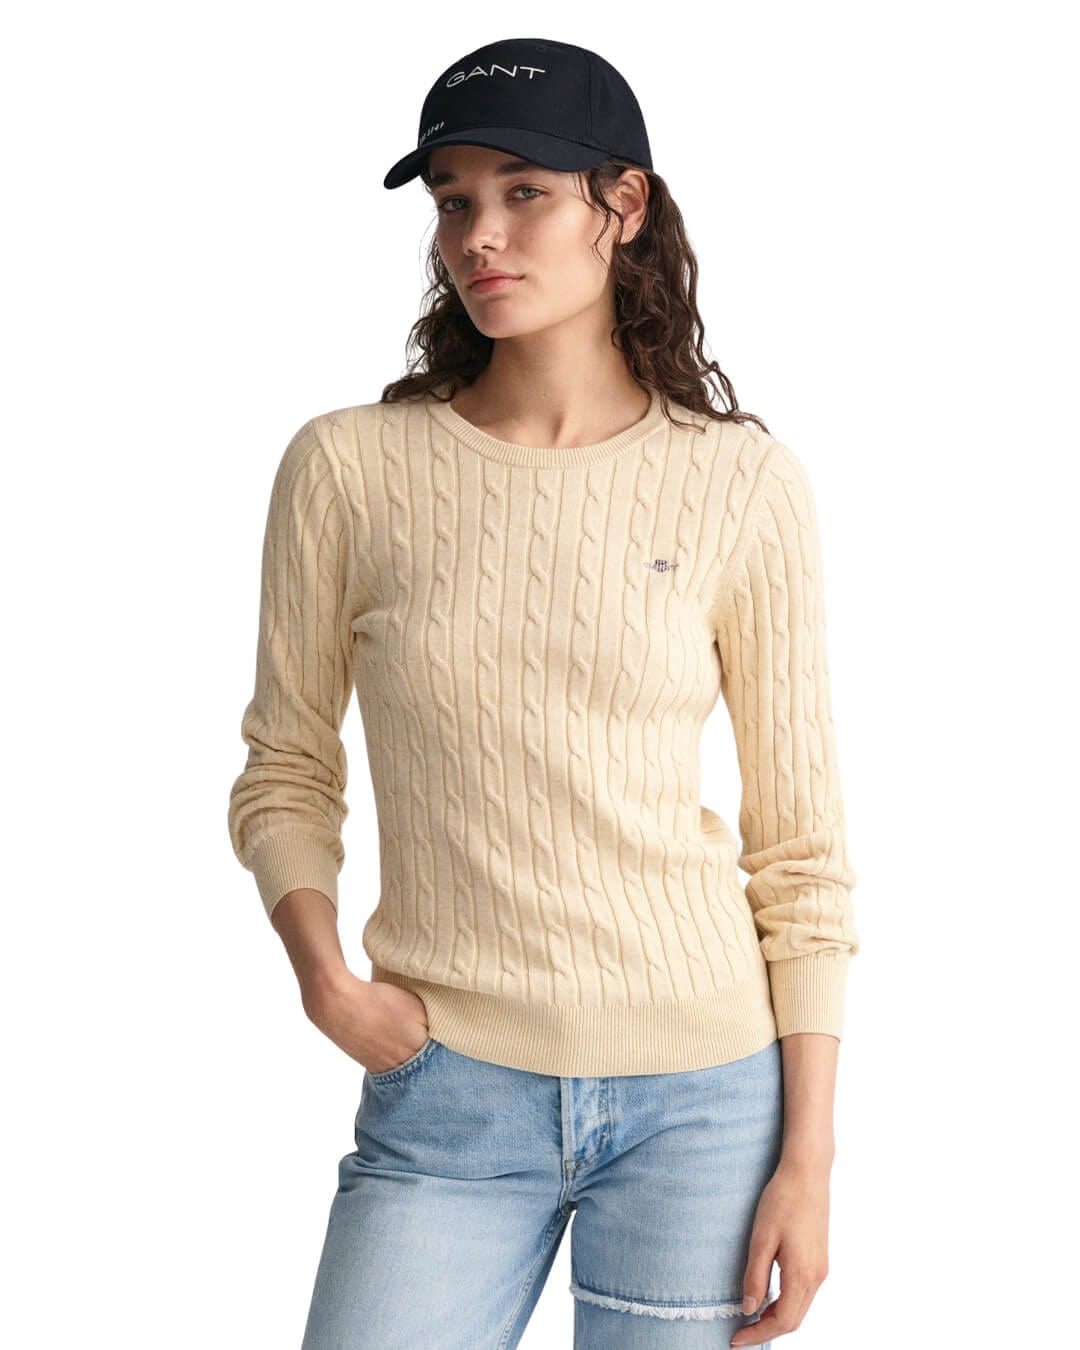 Gant Jumpers Gant Linen Stretch Cotton Cable Knit Crew Neck Sweater